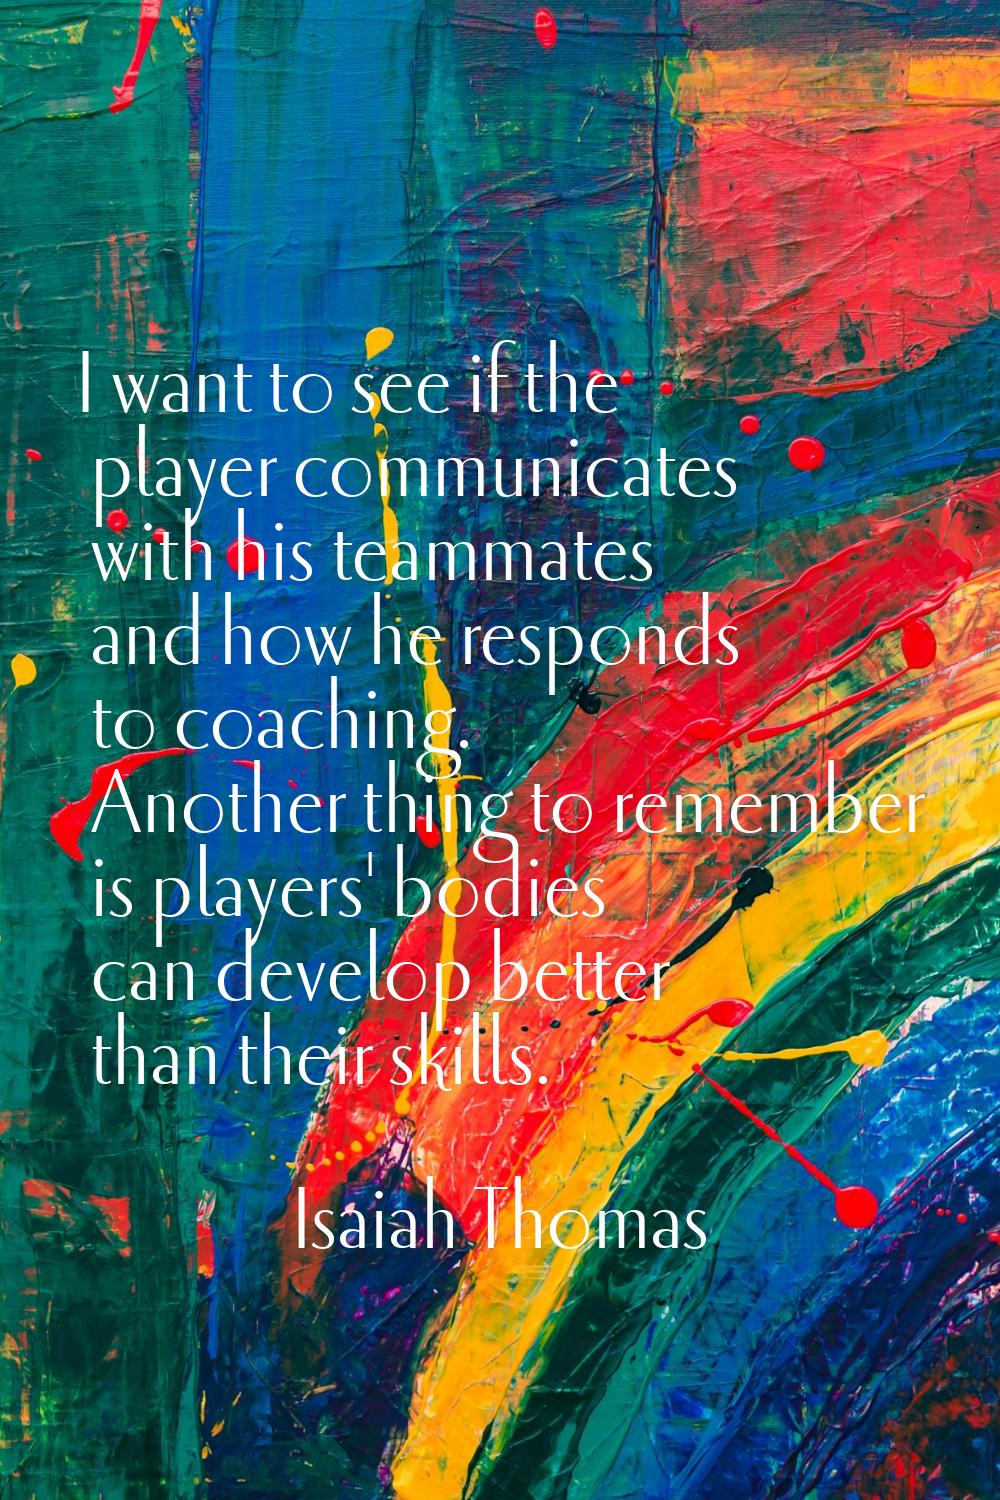 I want to see if the player communicates with his teammates and how he responds to coaching. Anothe